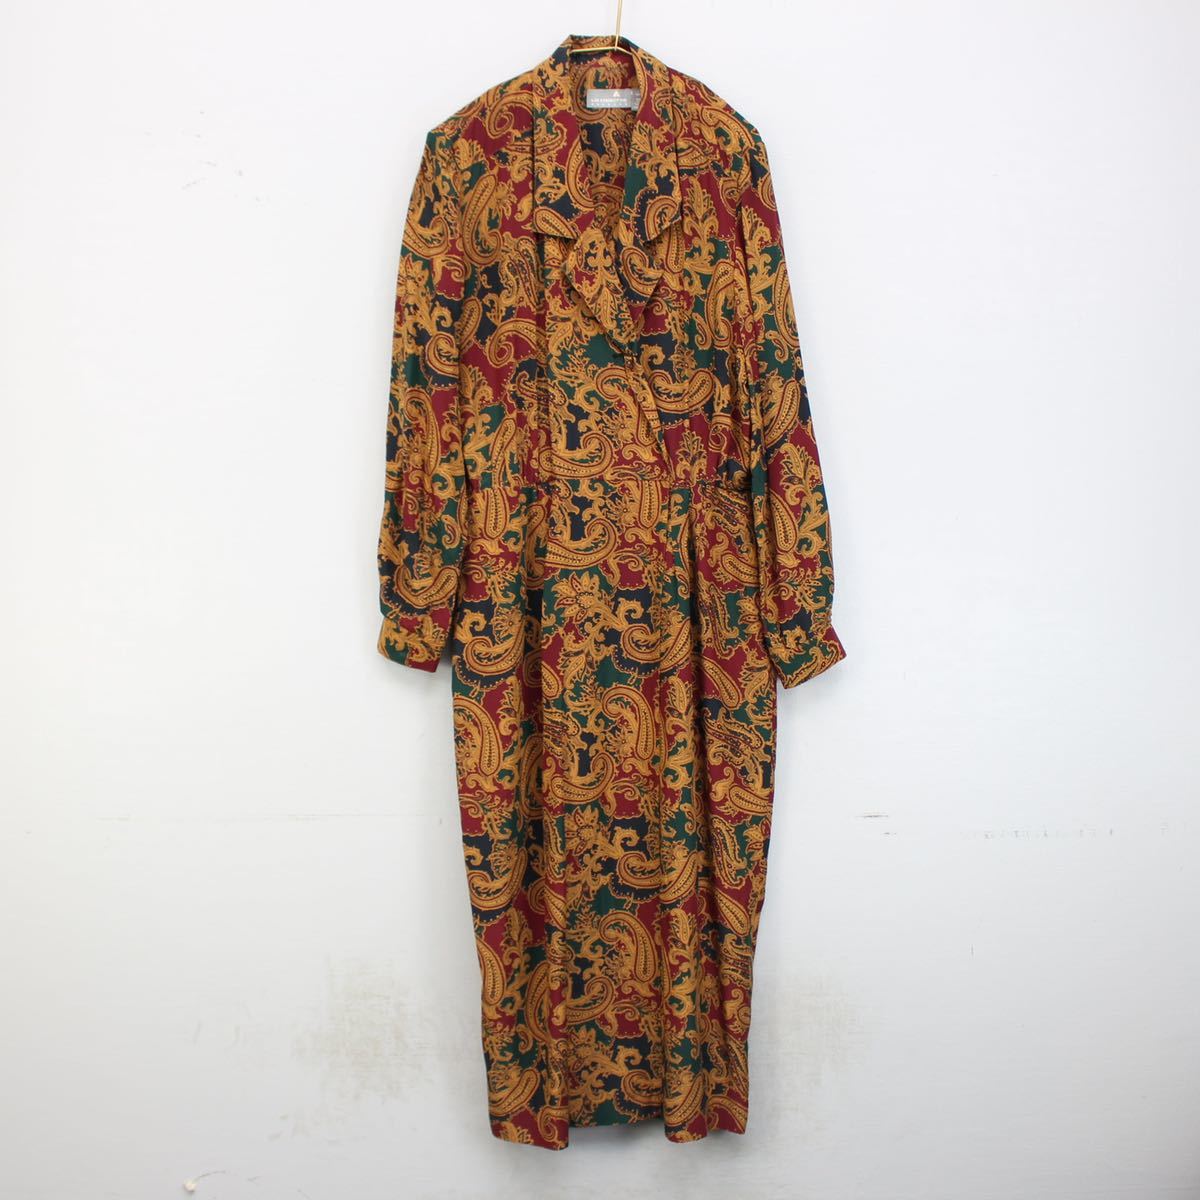 USA VINTAGE LIZ CLAIBORNE PAISLEY PATTERNED DESIGN LONG ONE PIECE/アメリカ古着ペイズリー柄デザインロングワンピース_画像4